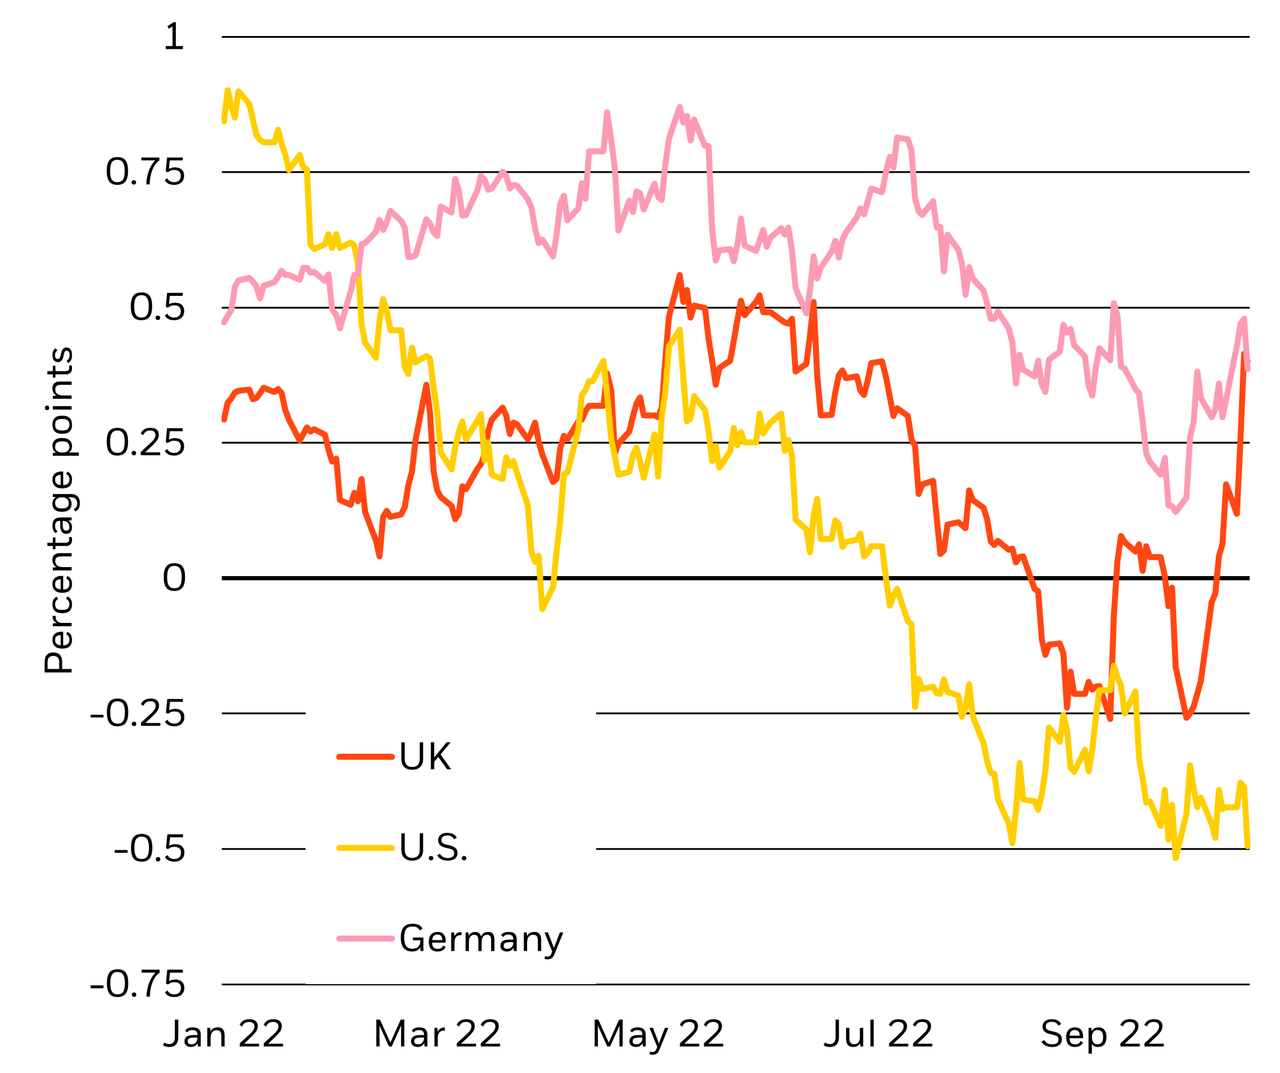 The orange line in the chart shows that the difference between 10-year and two-year UK gilts has surged compared to more muted moves for U.S. Treasuries (yellow line) and German bunds (pink line).